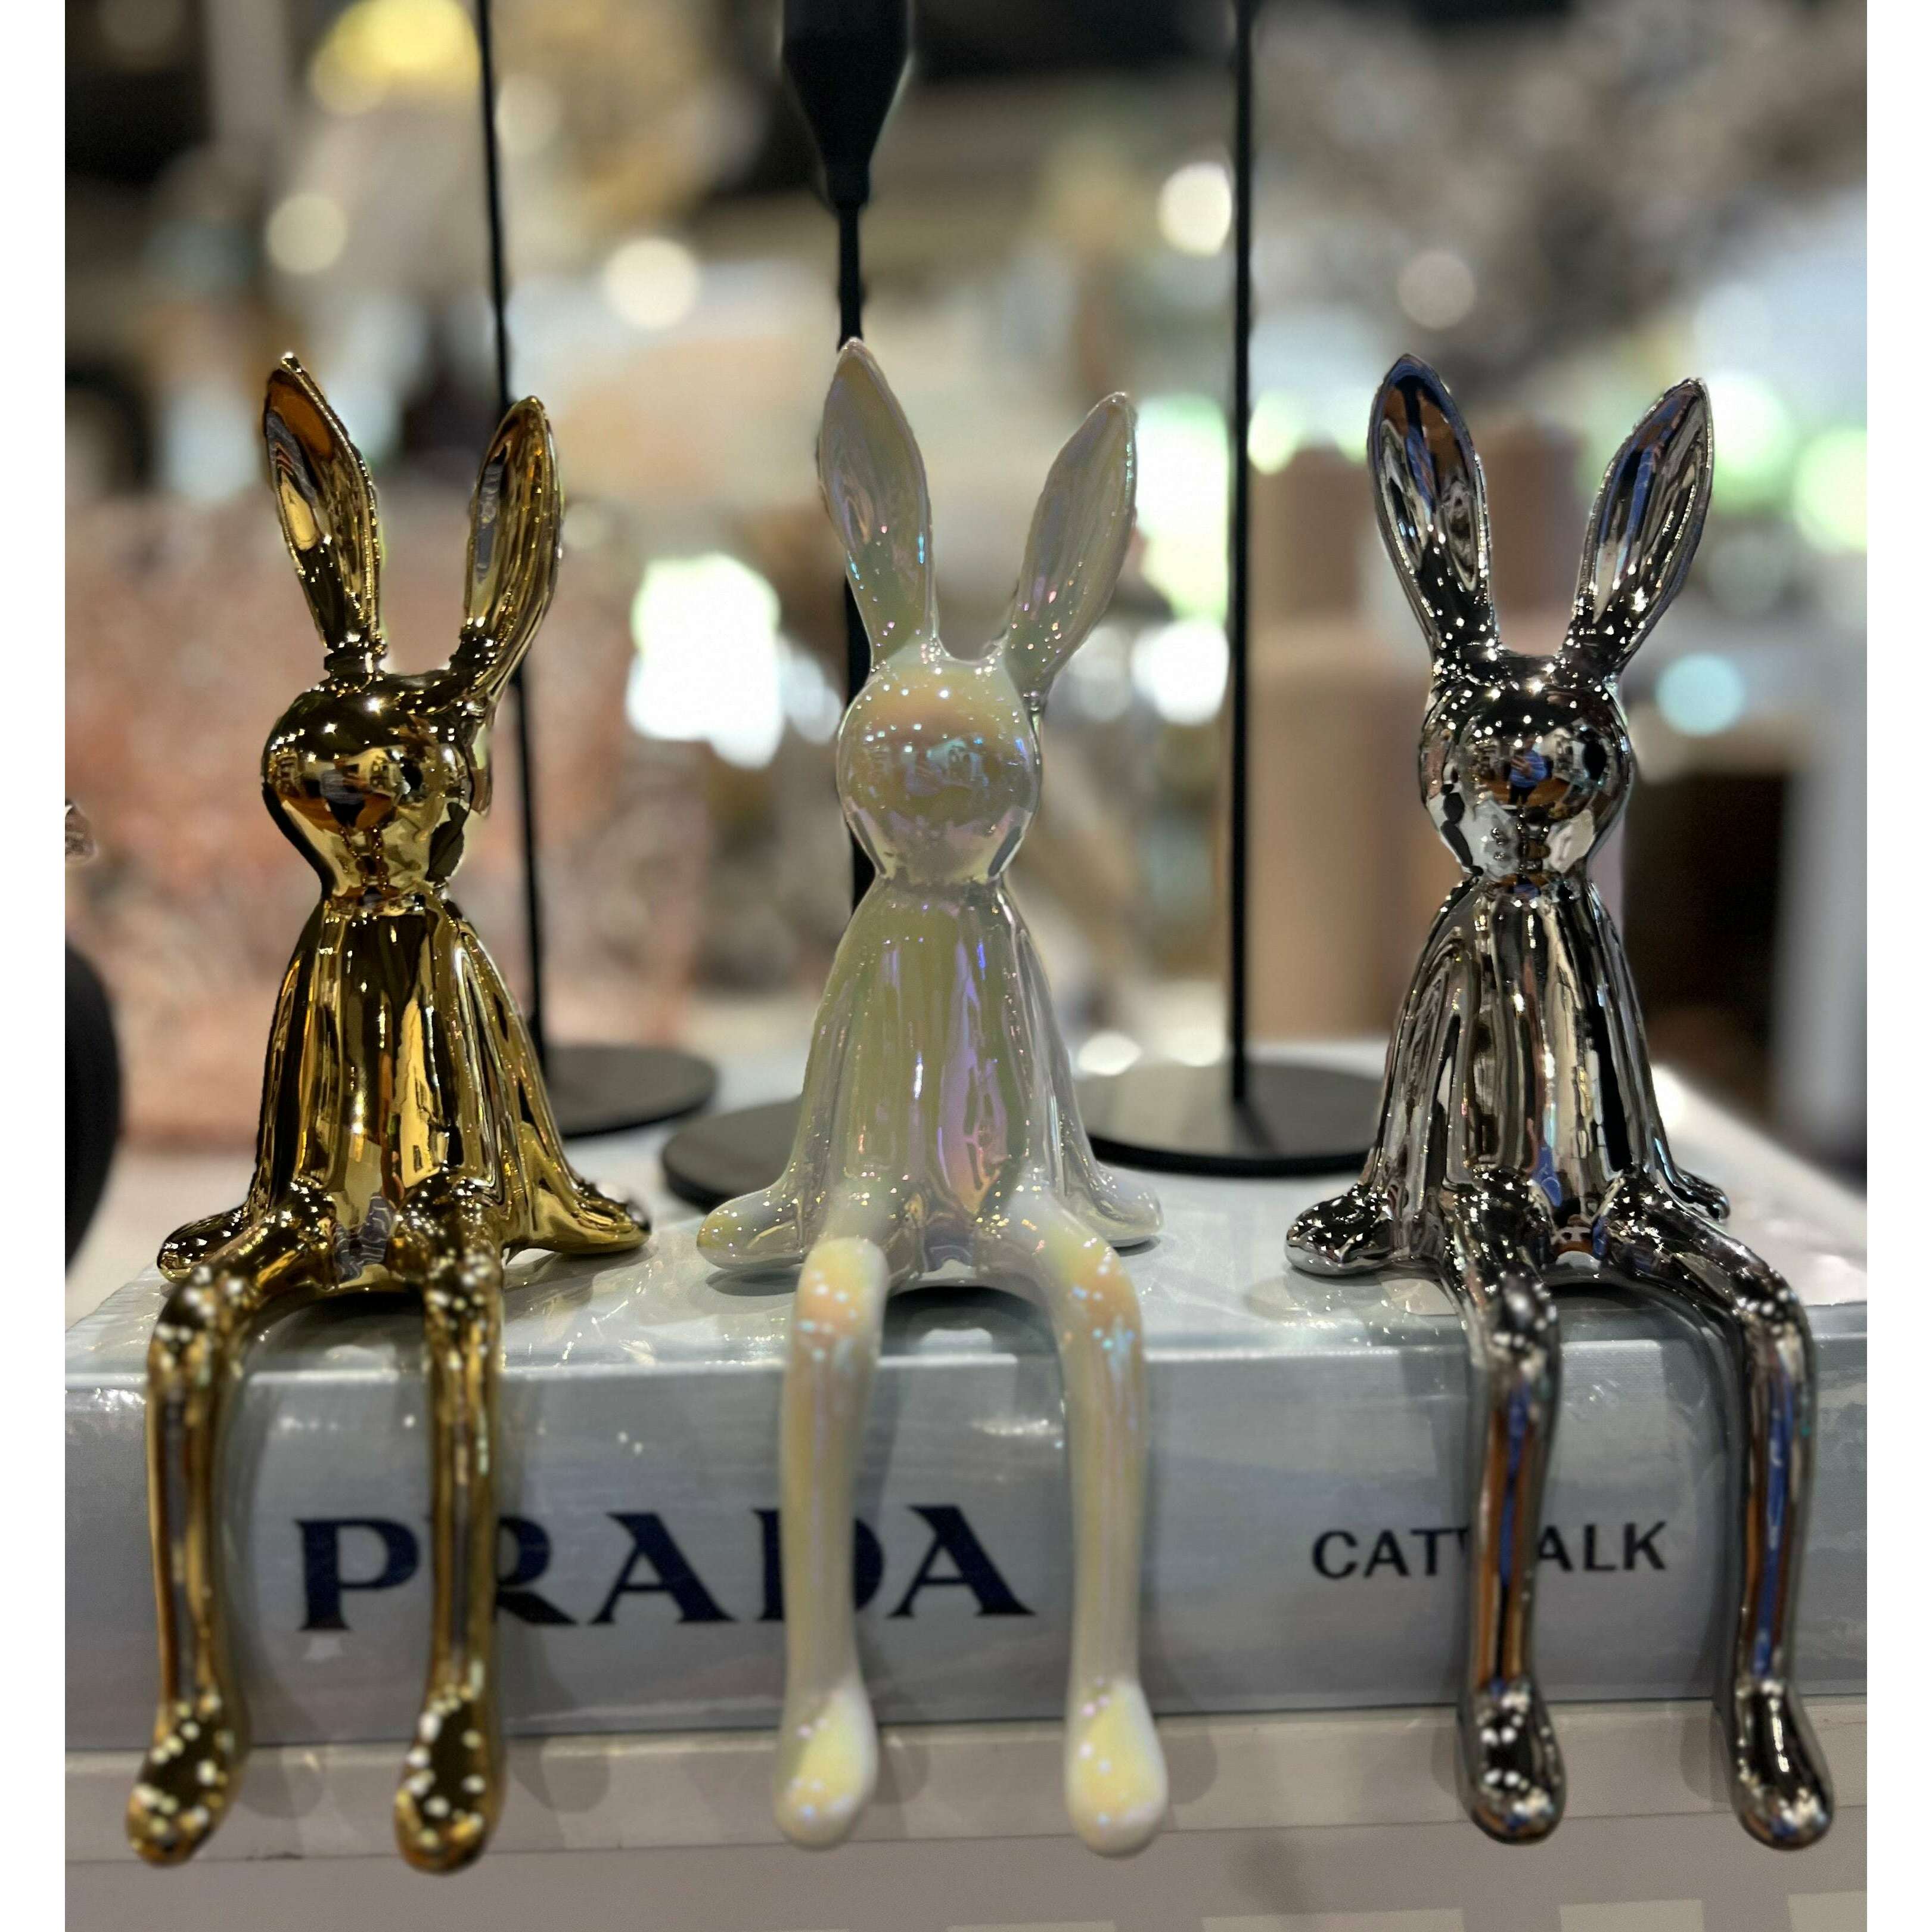 Impodimo Living & Giving:Regal Rabbit - Silver:Swing Gifts